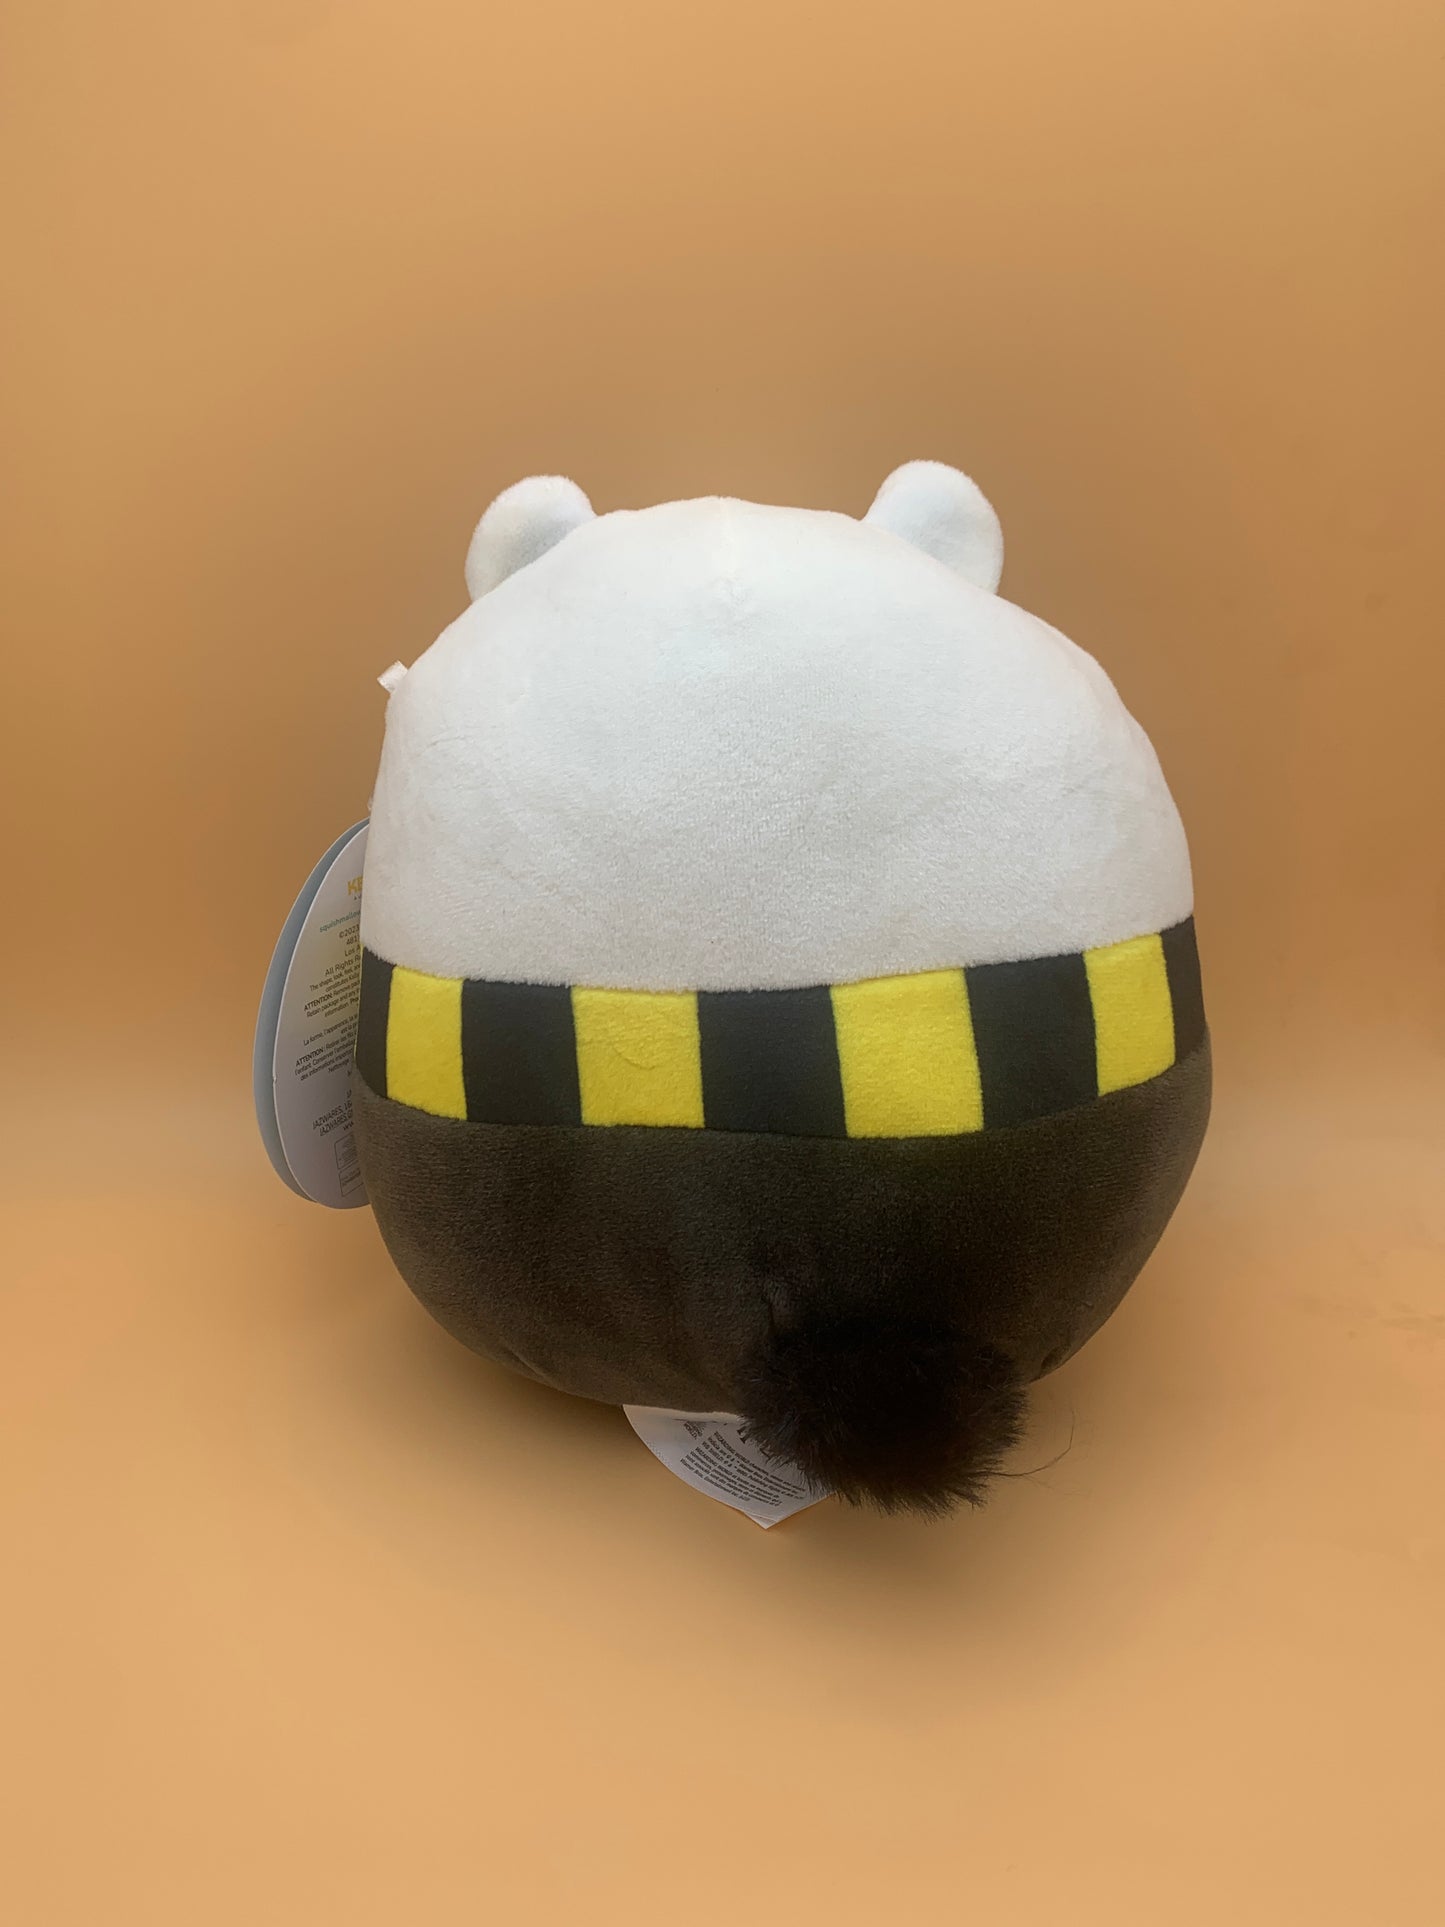 Squishmallow Harry Potter Hufflepuff Badger 6.5" inch